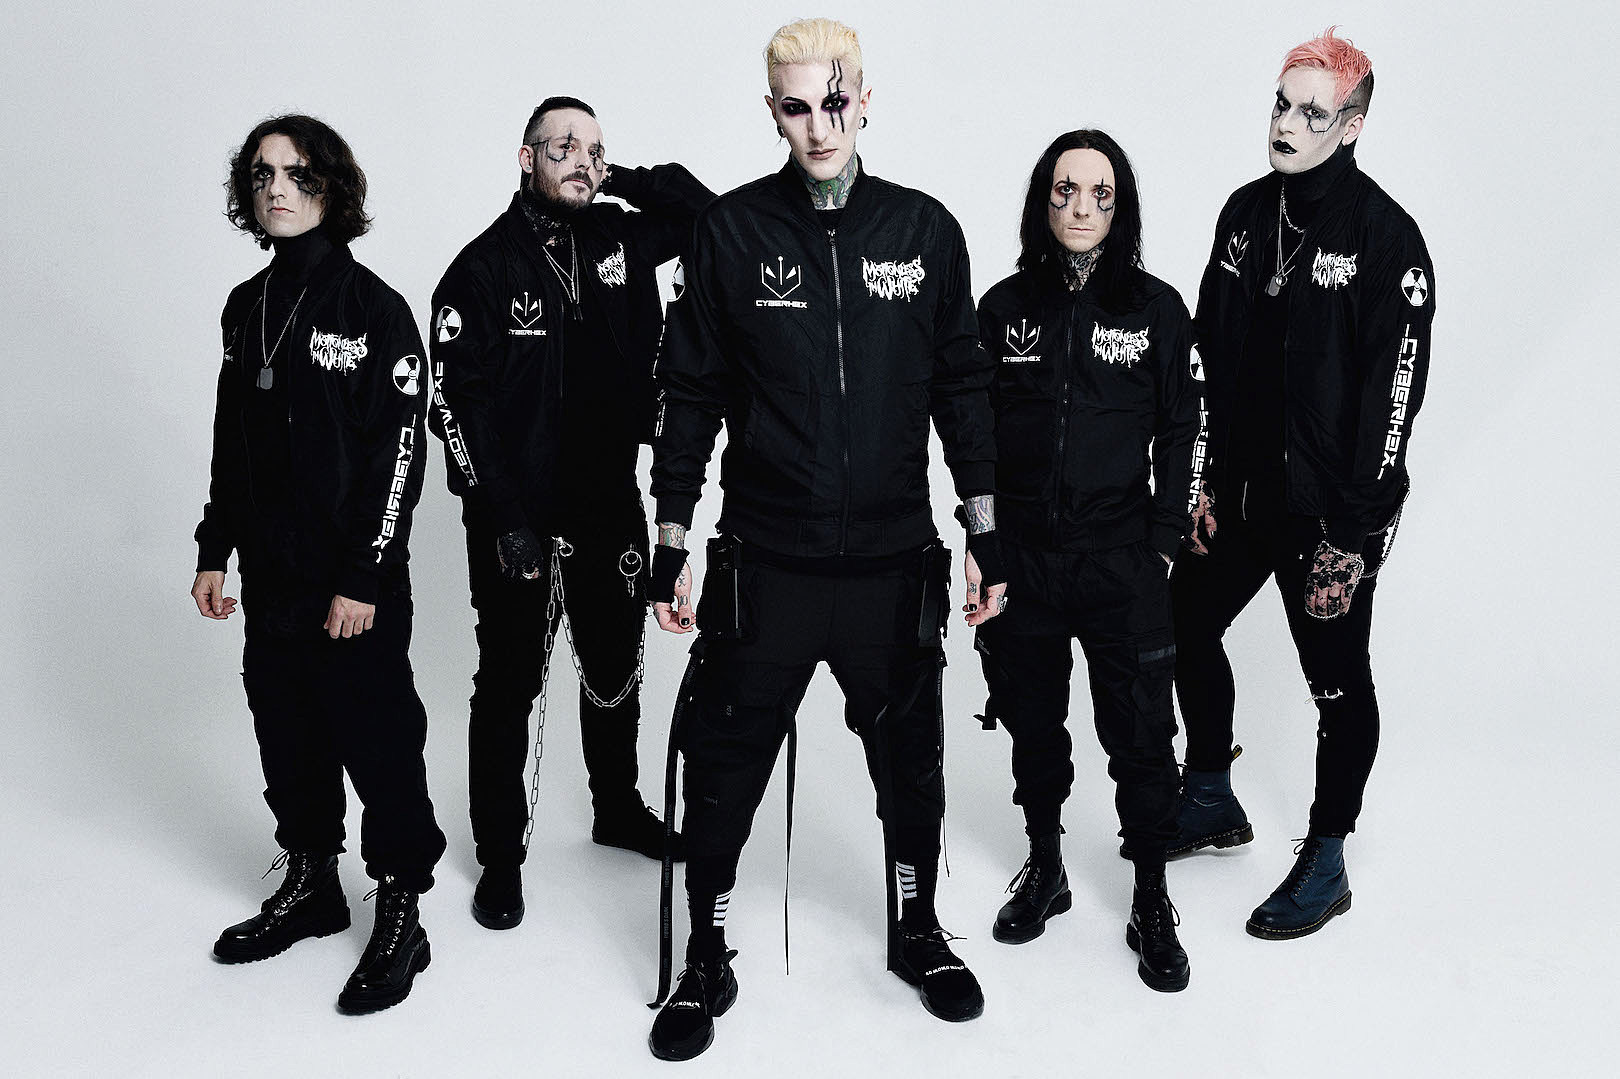 Chris Motionless (Cerulli) Biography and Personal Life